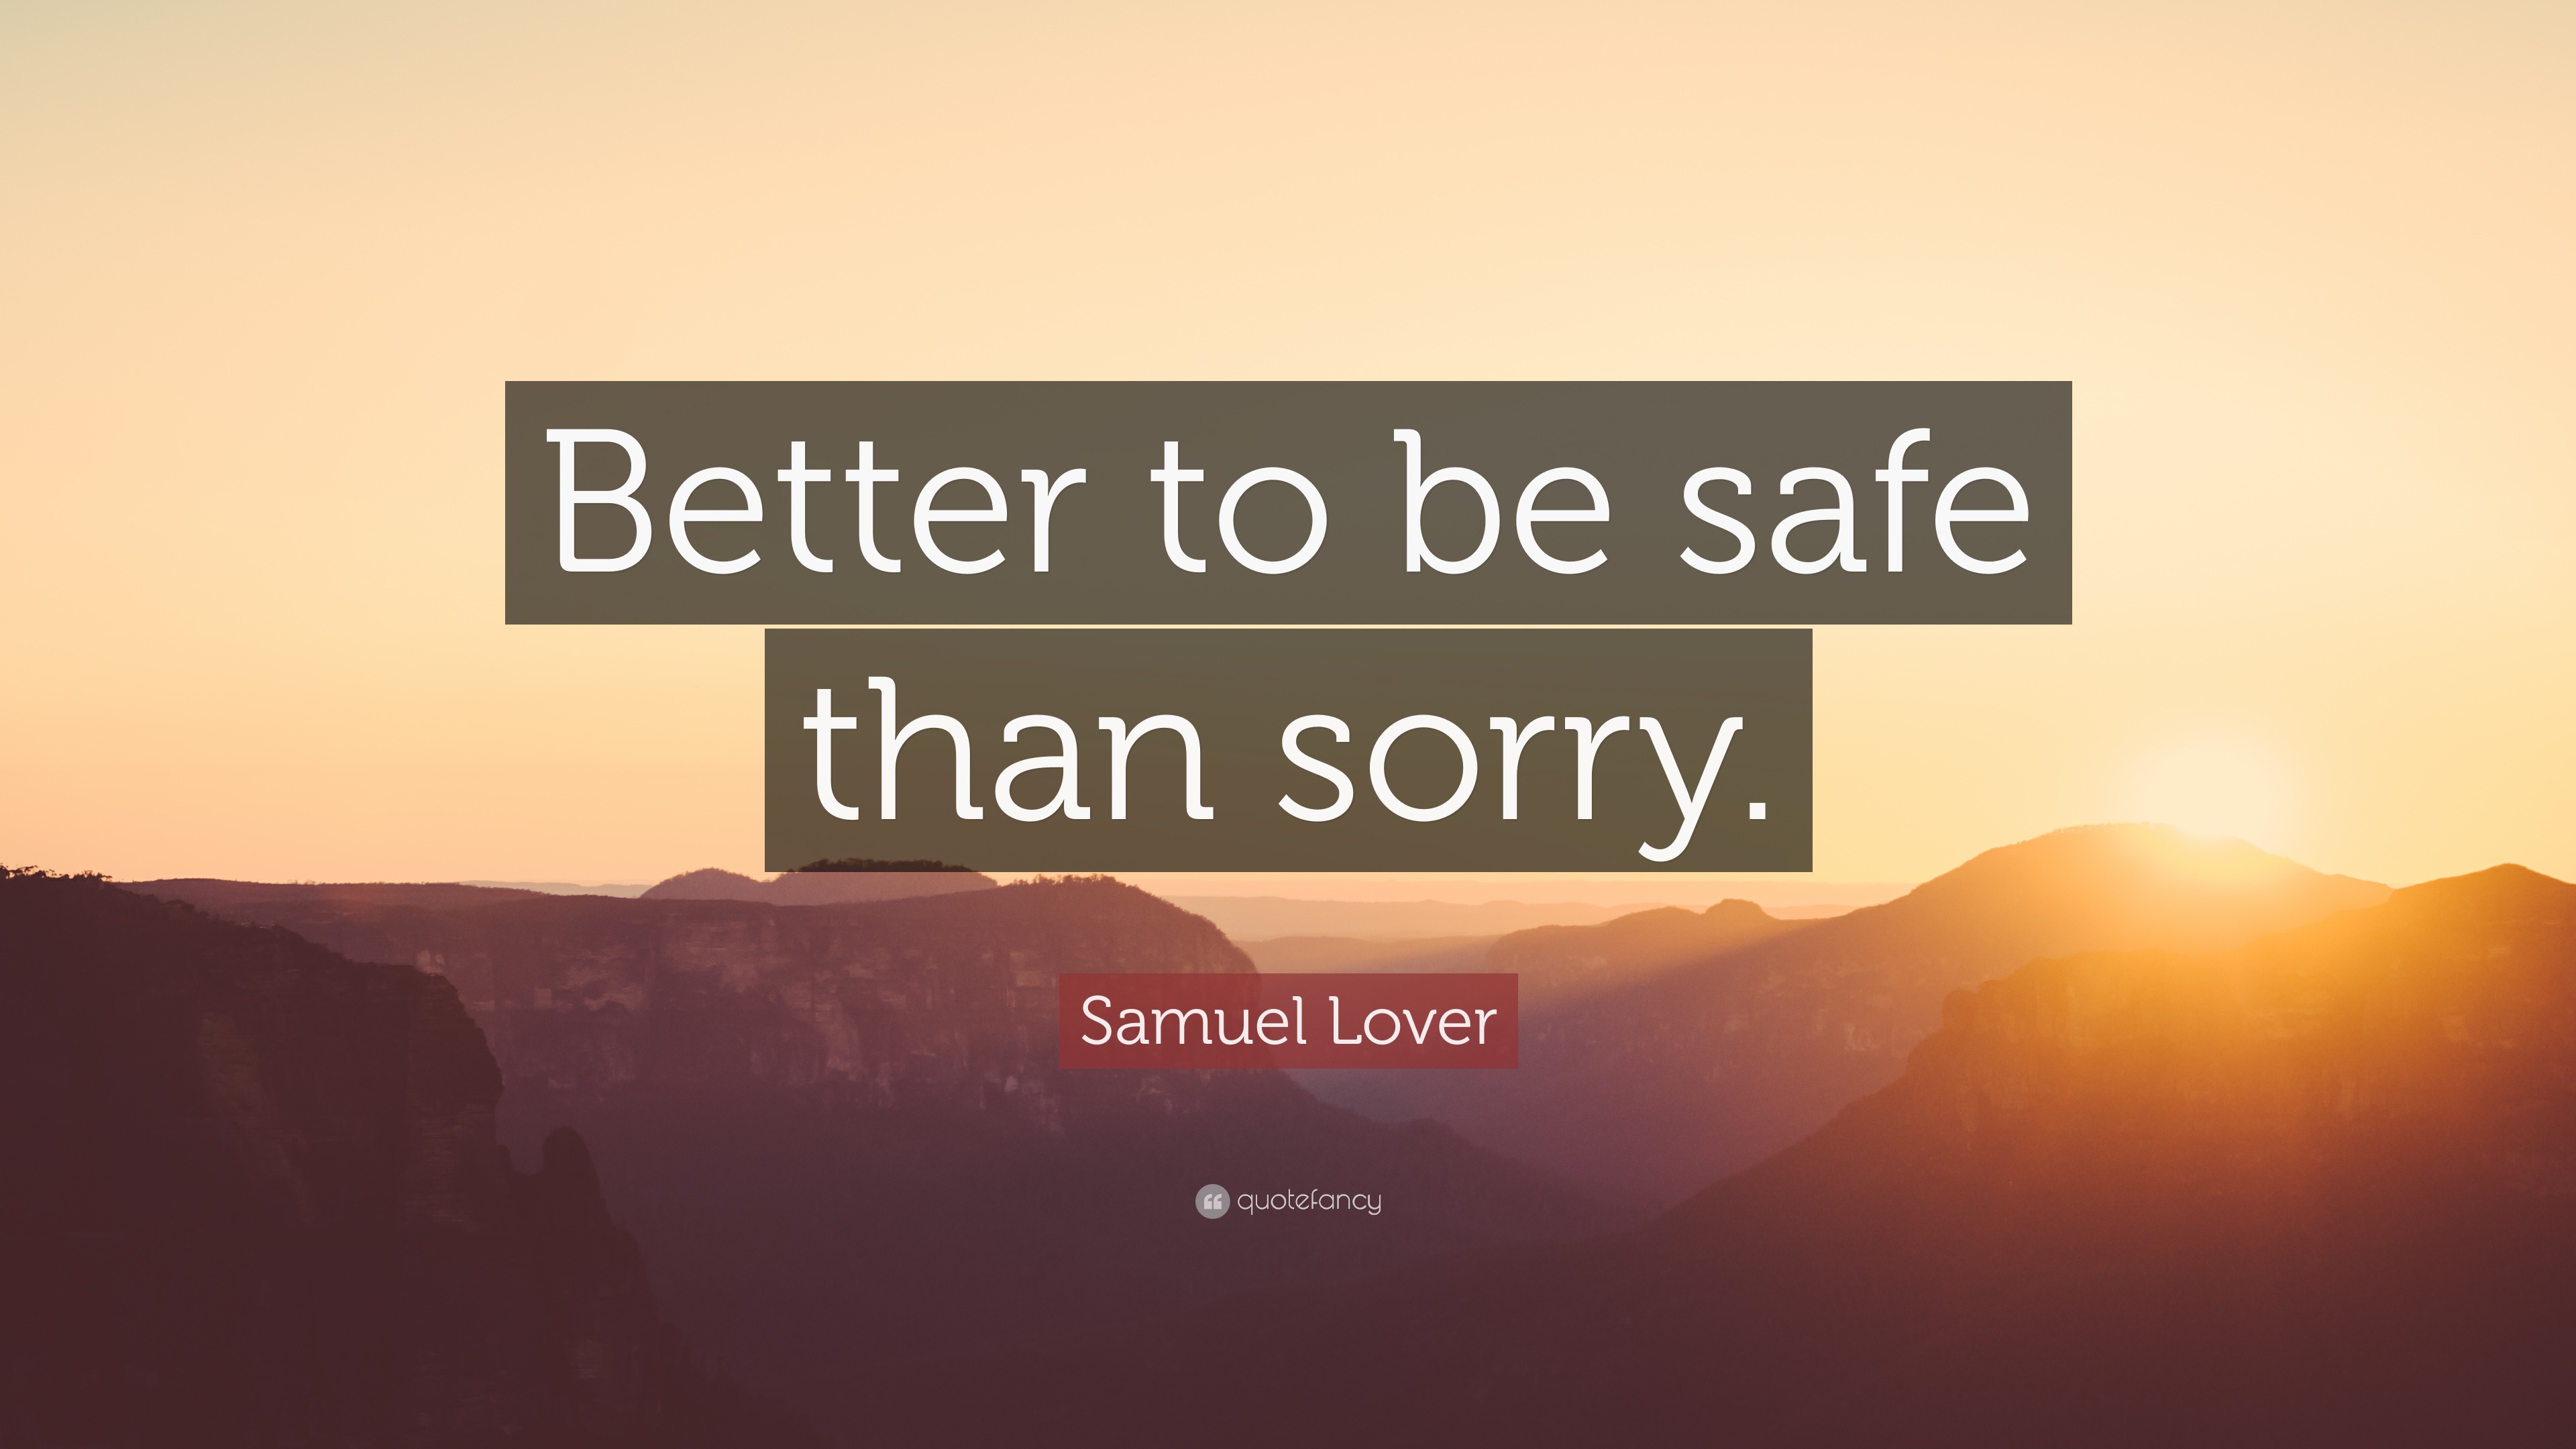 Samuel Lover Quote: “Better to be safe than sorry.”